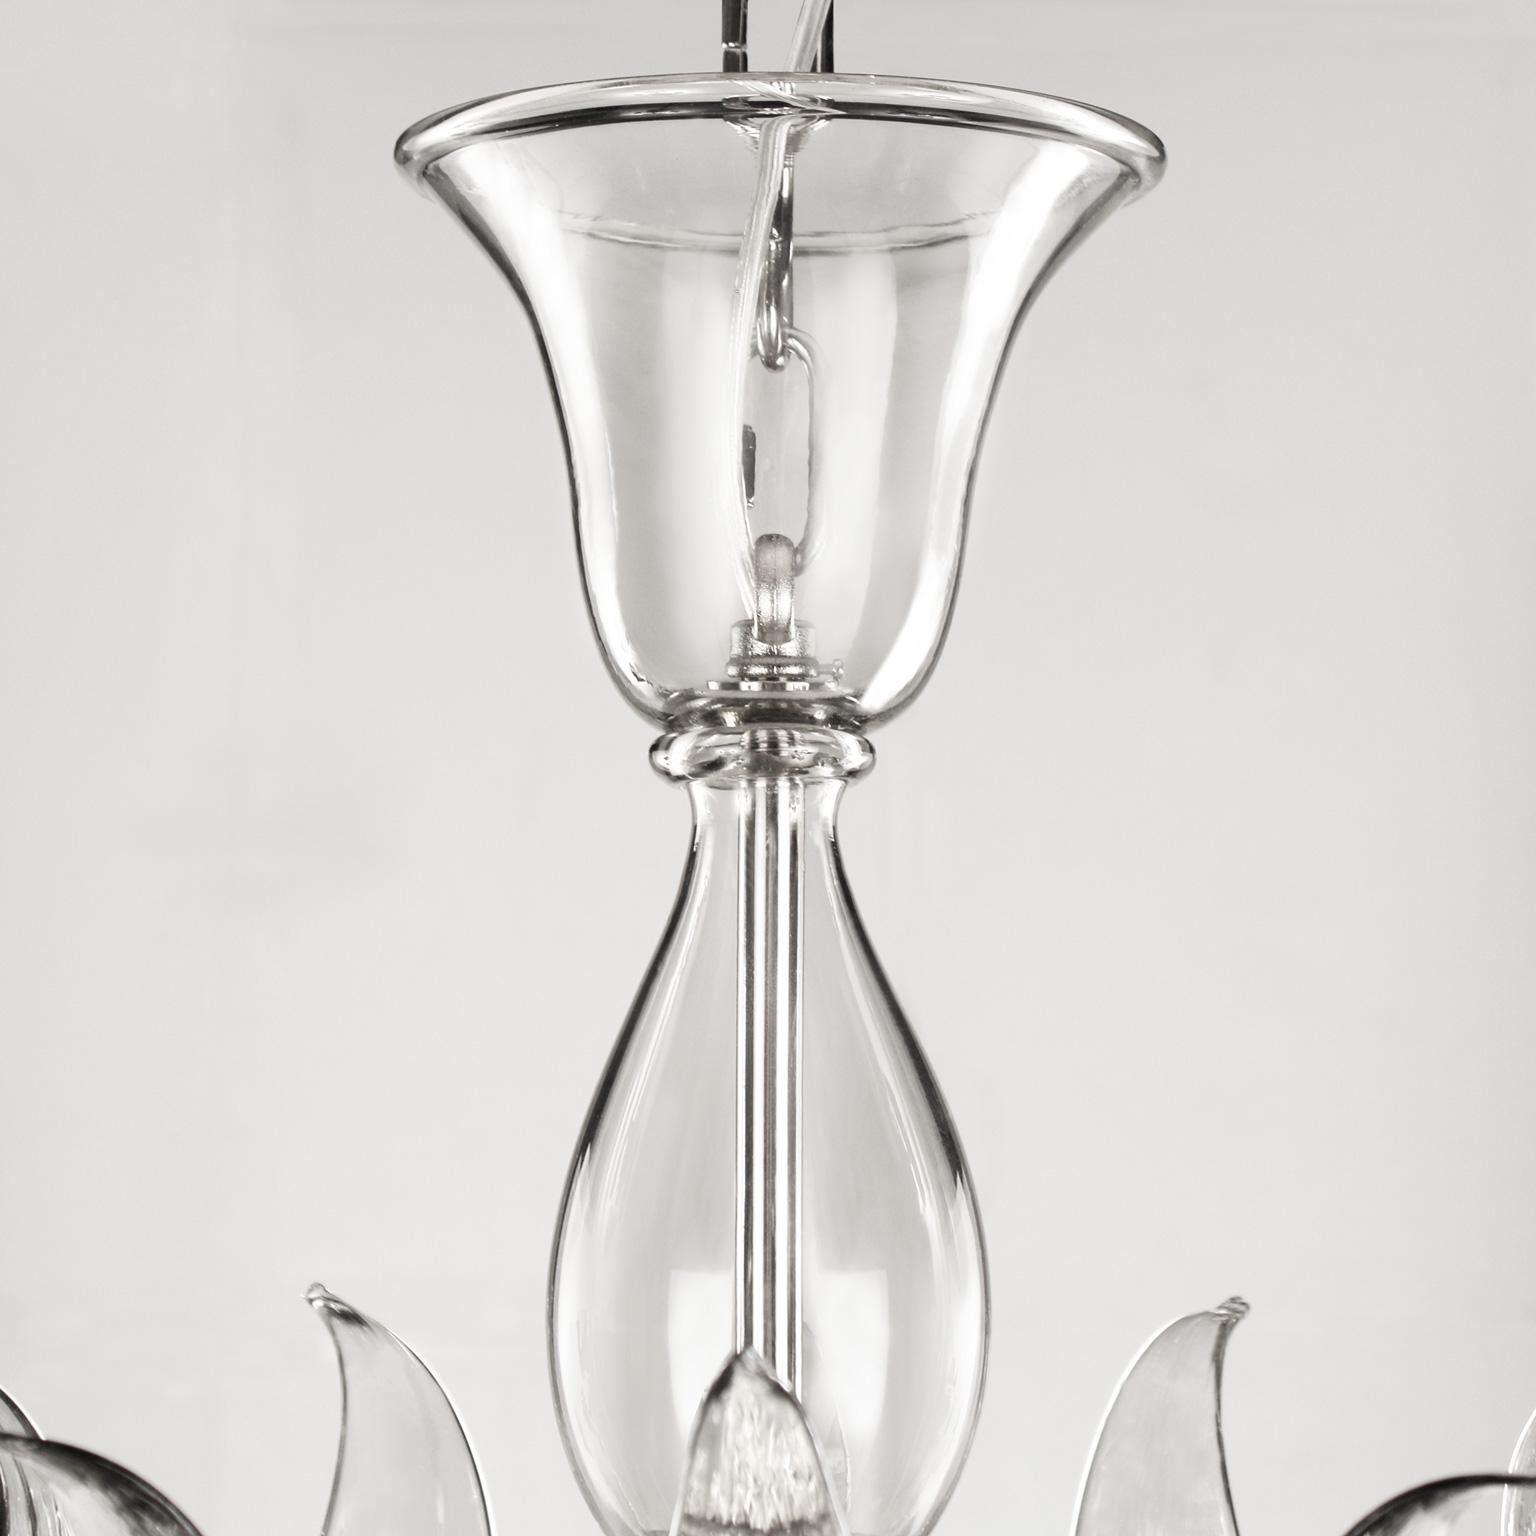 Swing 275 Chandelier, 5 lights. Grey Murano glass by Multiforme

The collection of Murano glass chandeliers Swing 275 is one of our collections that most differs from the Classic Murano tradition: the design of this collection is closer to the